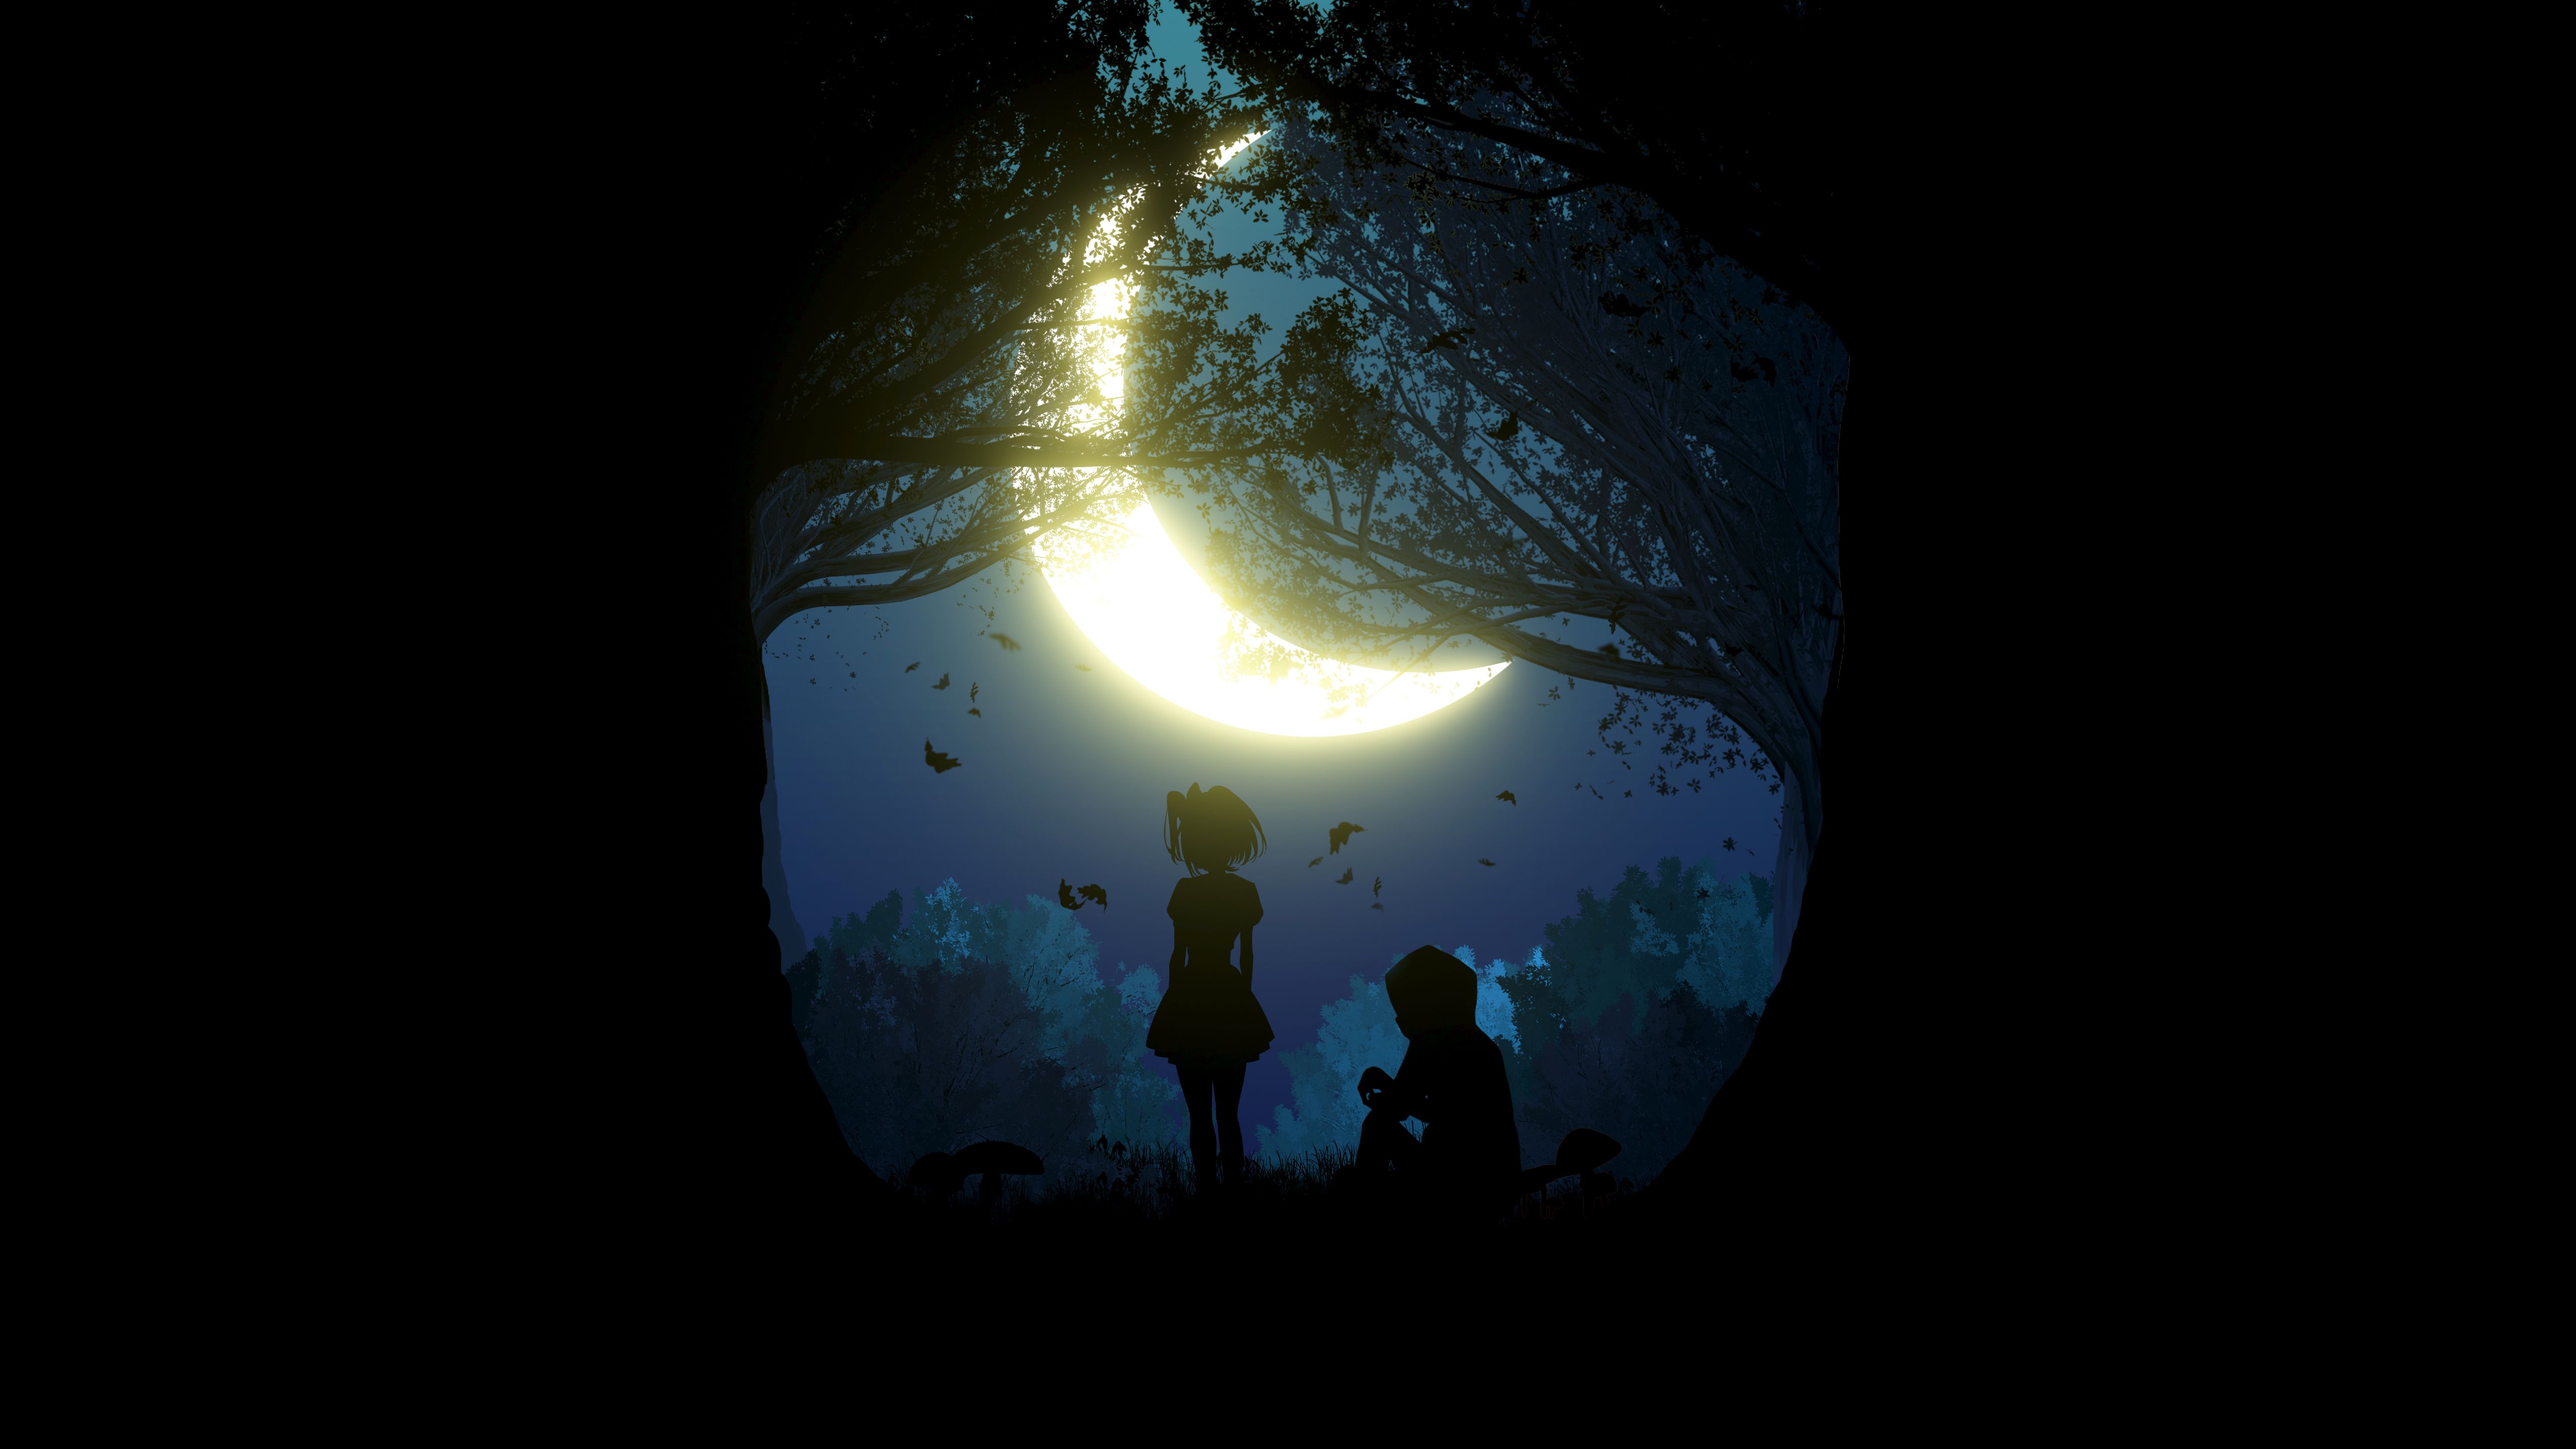 A couple of people sitting under the moon - Black, dark anime